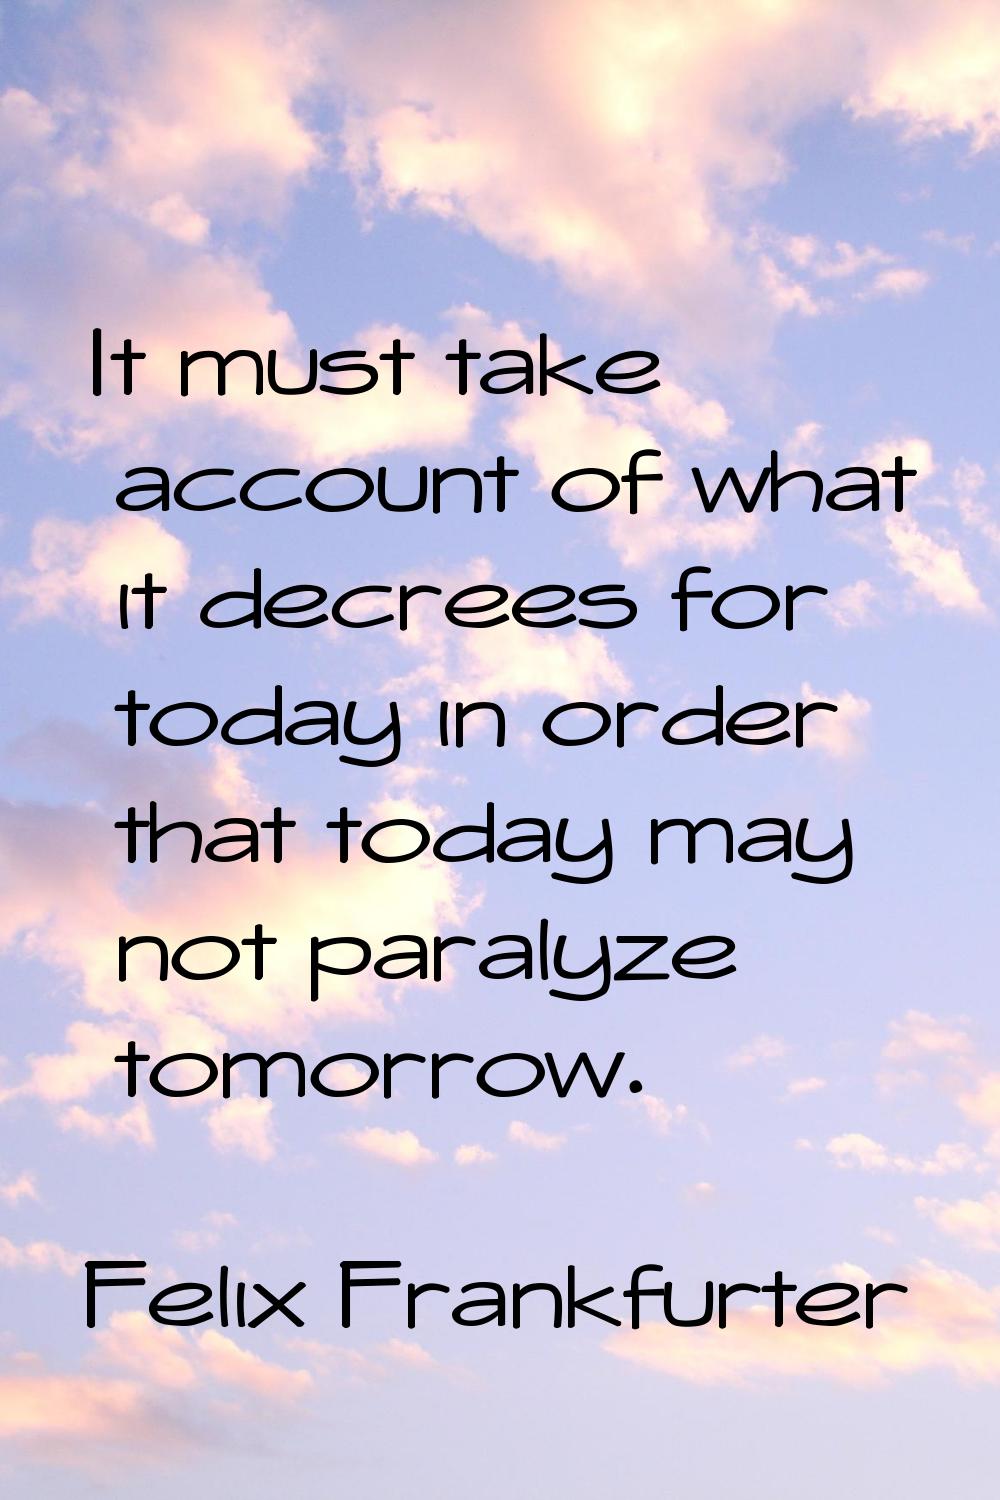 It must take account of what it decrees for today in order that today may not paralyze tomorrow.